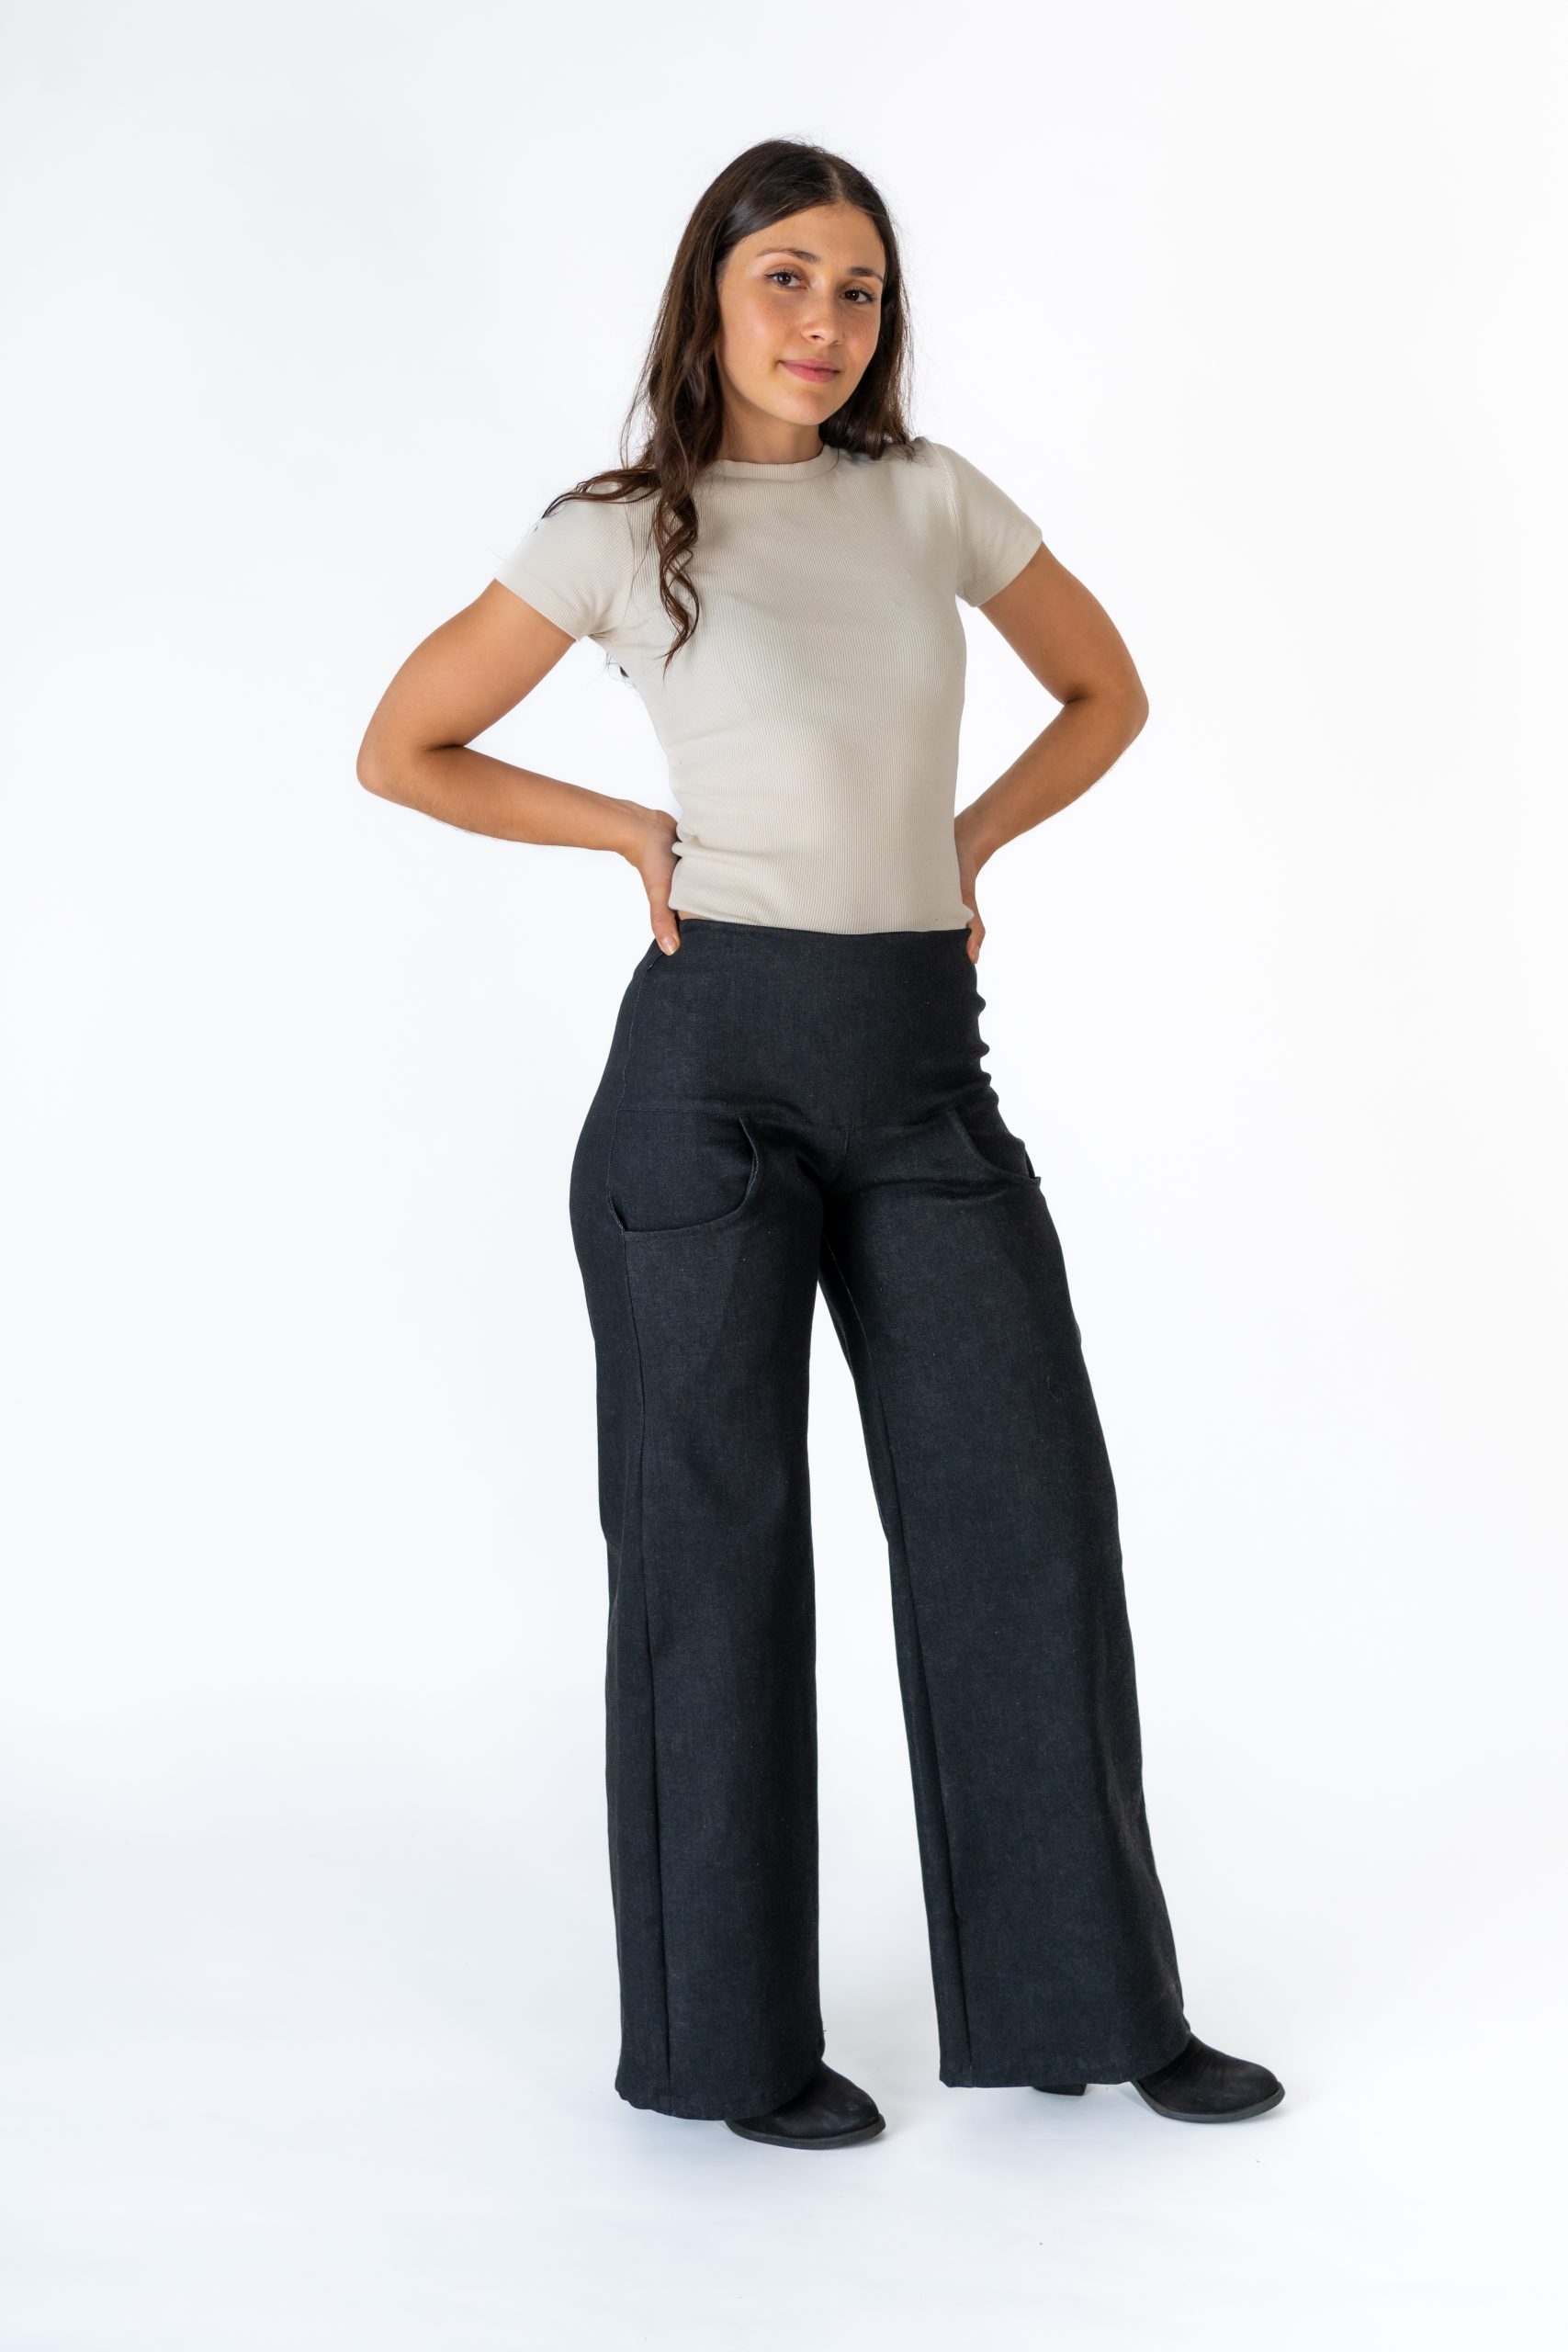 Women's Pants :: Meltdown :: High Waisted Wide Leg Pants with back zip